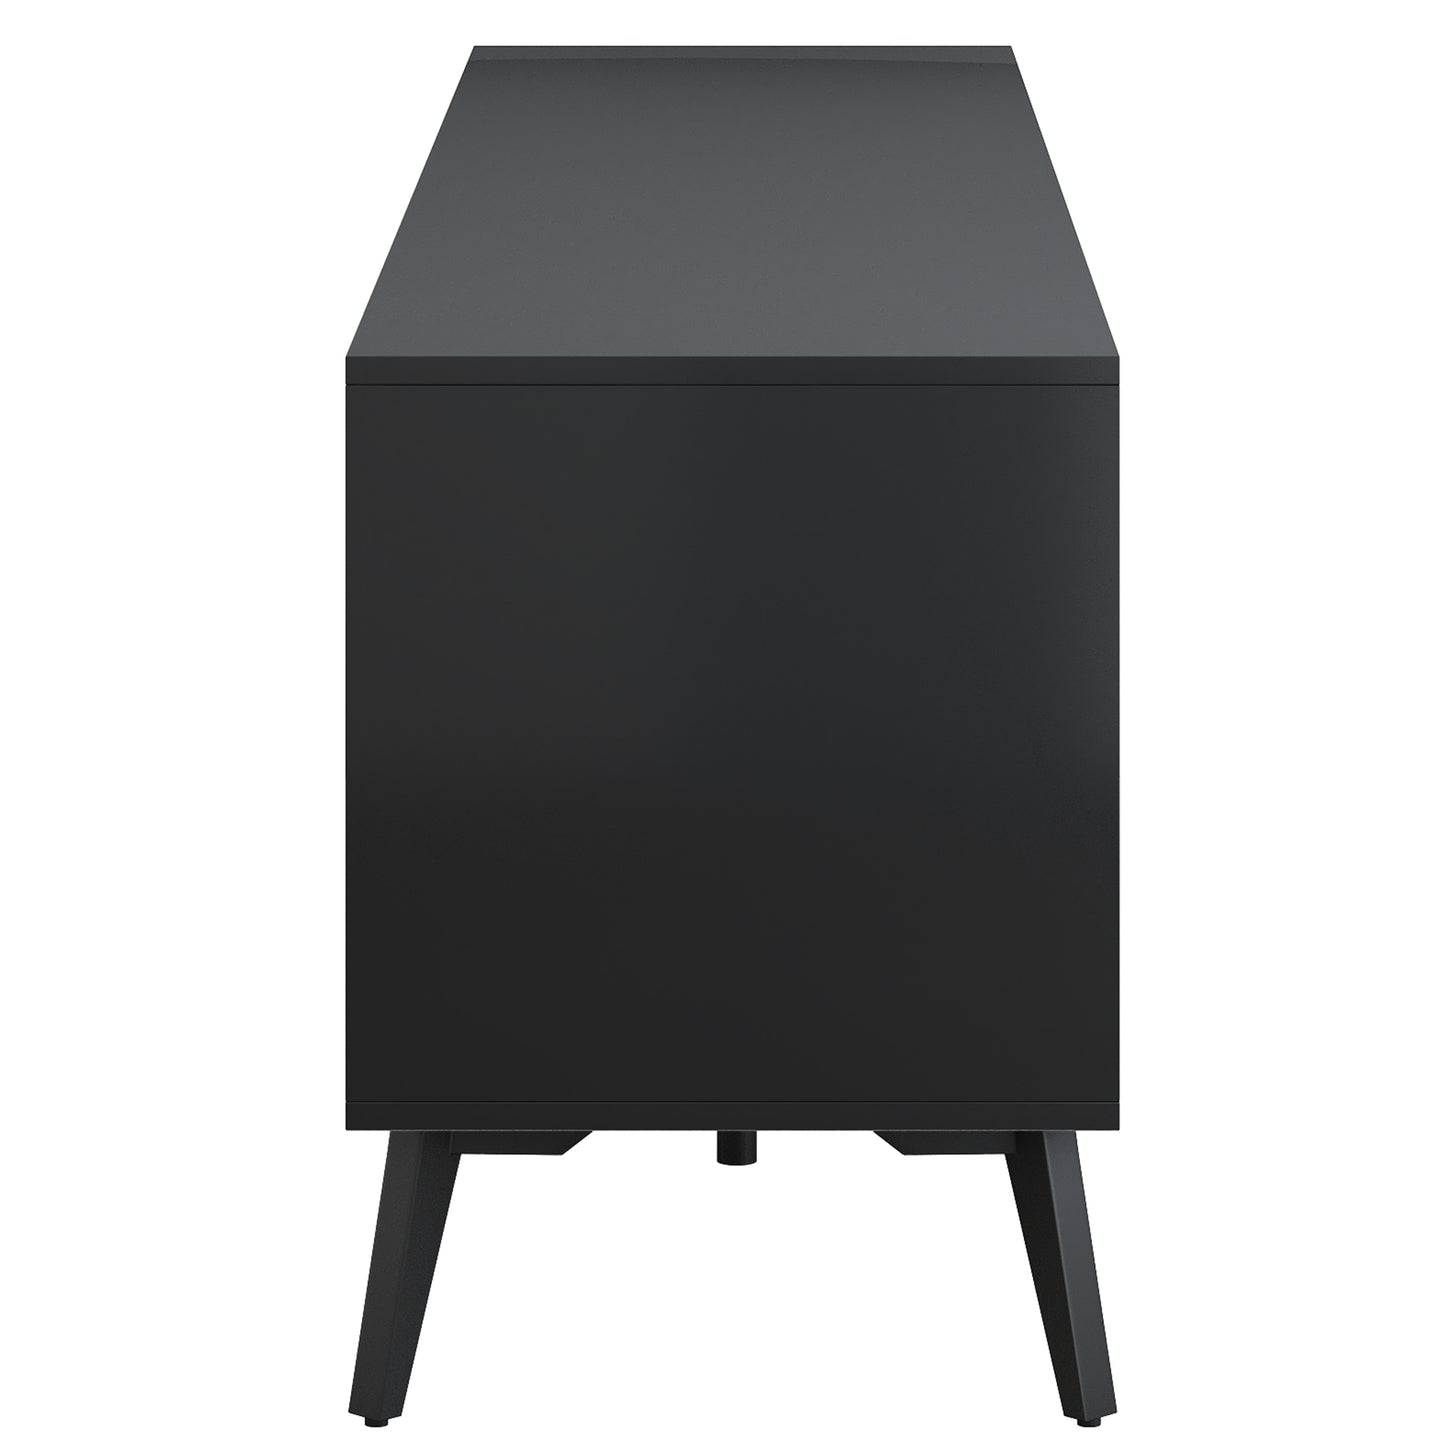 Timber Stand for 70 inch TV in Black Finish